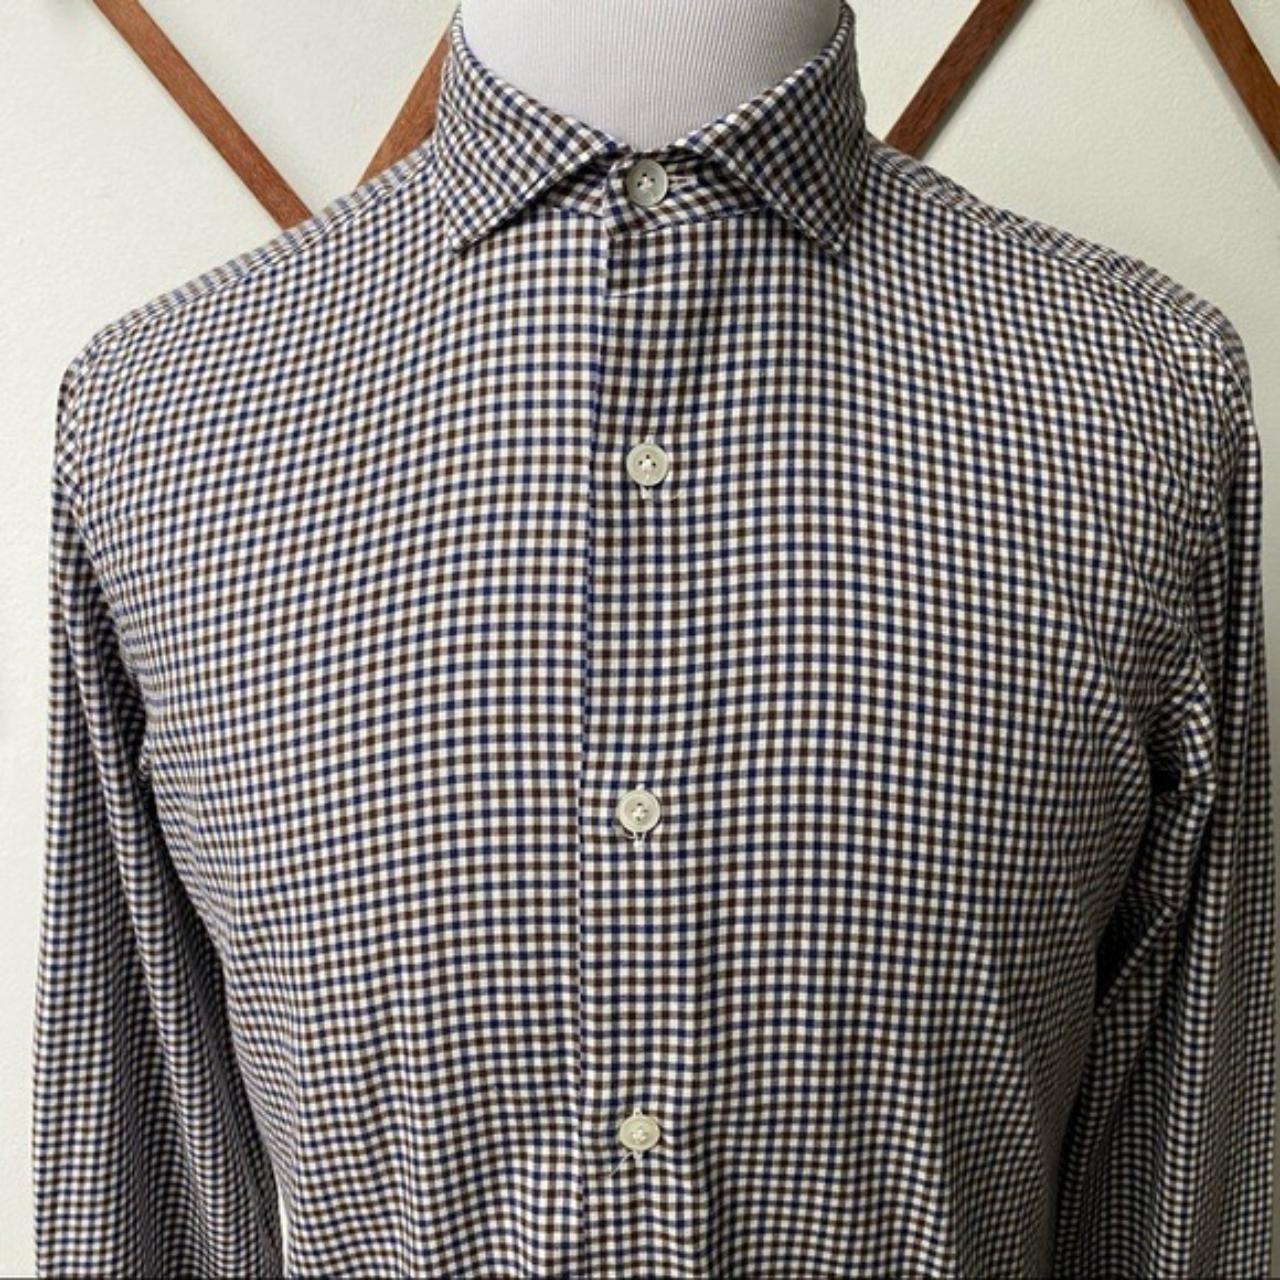 Product Image 2 - Eleventy Checkered Button Down Shirt

Brand: